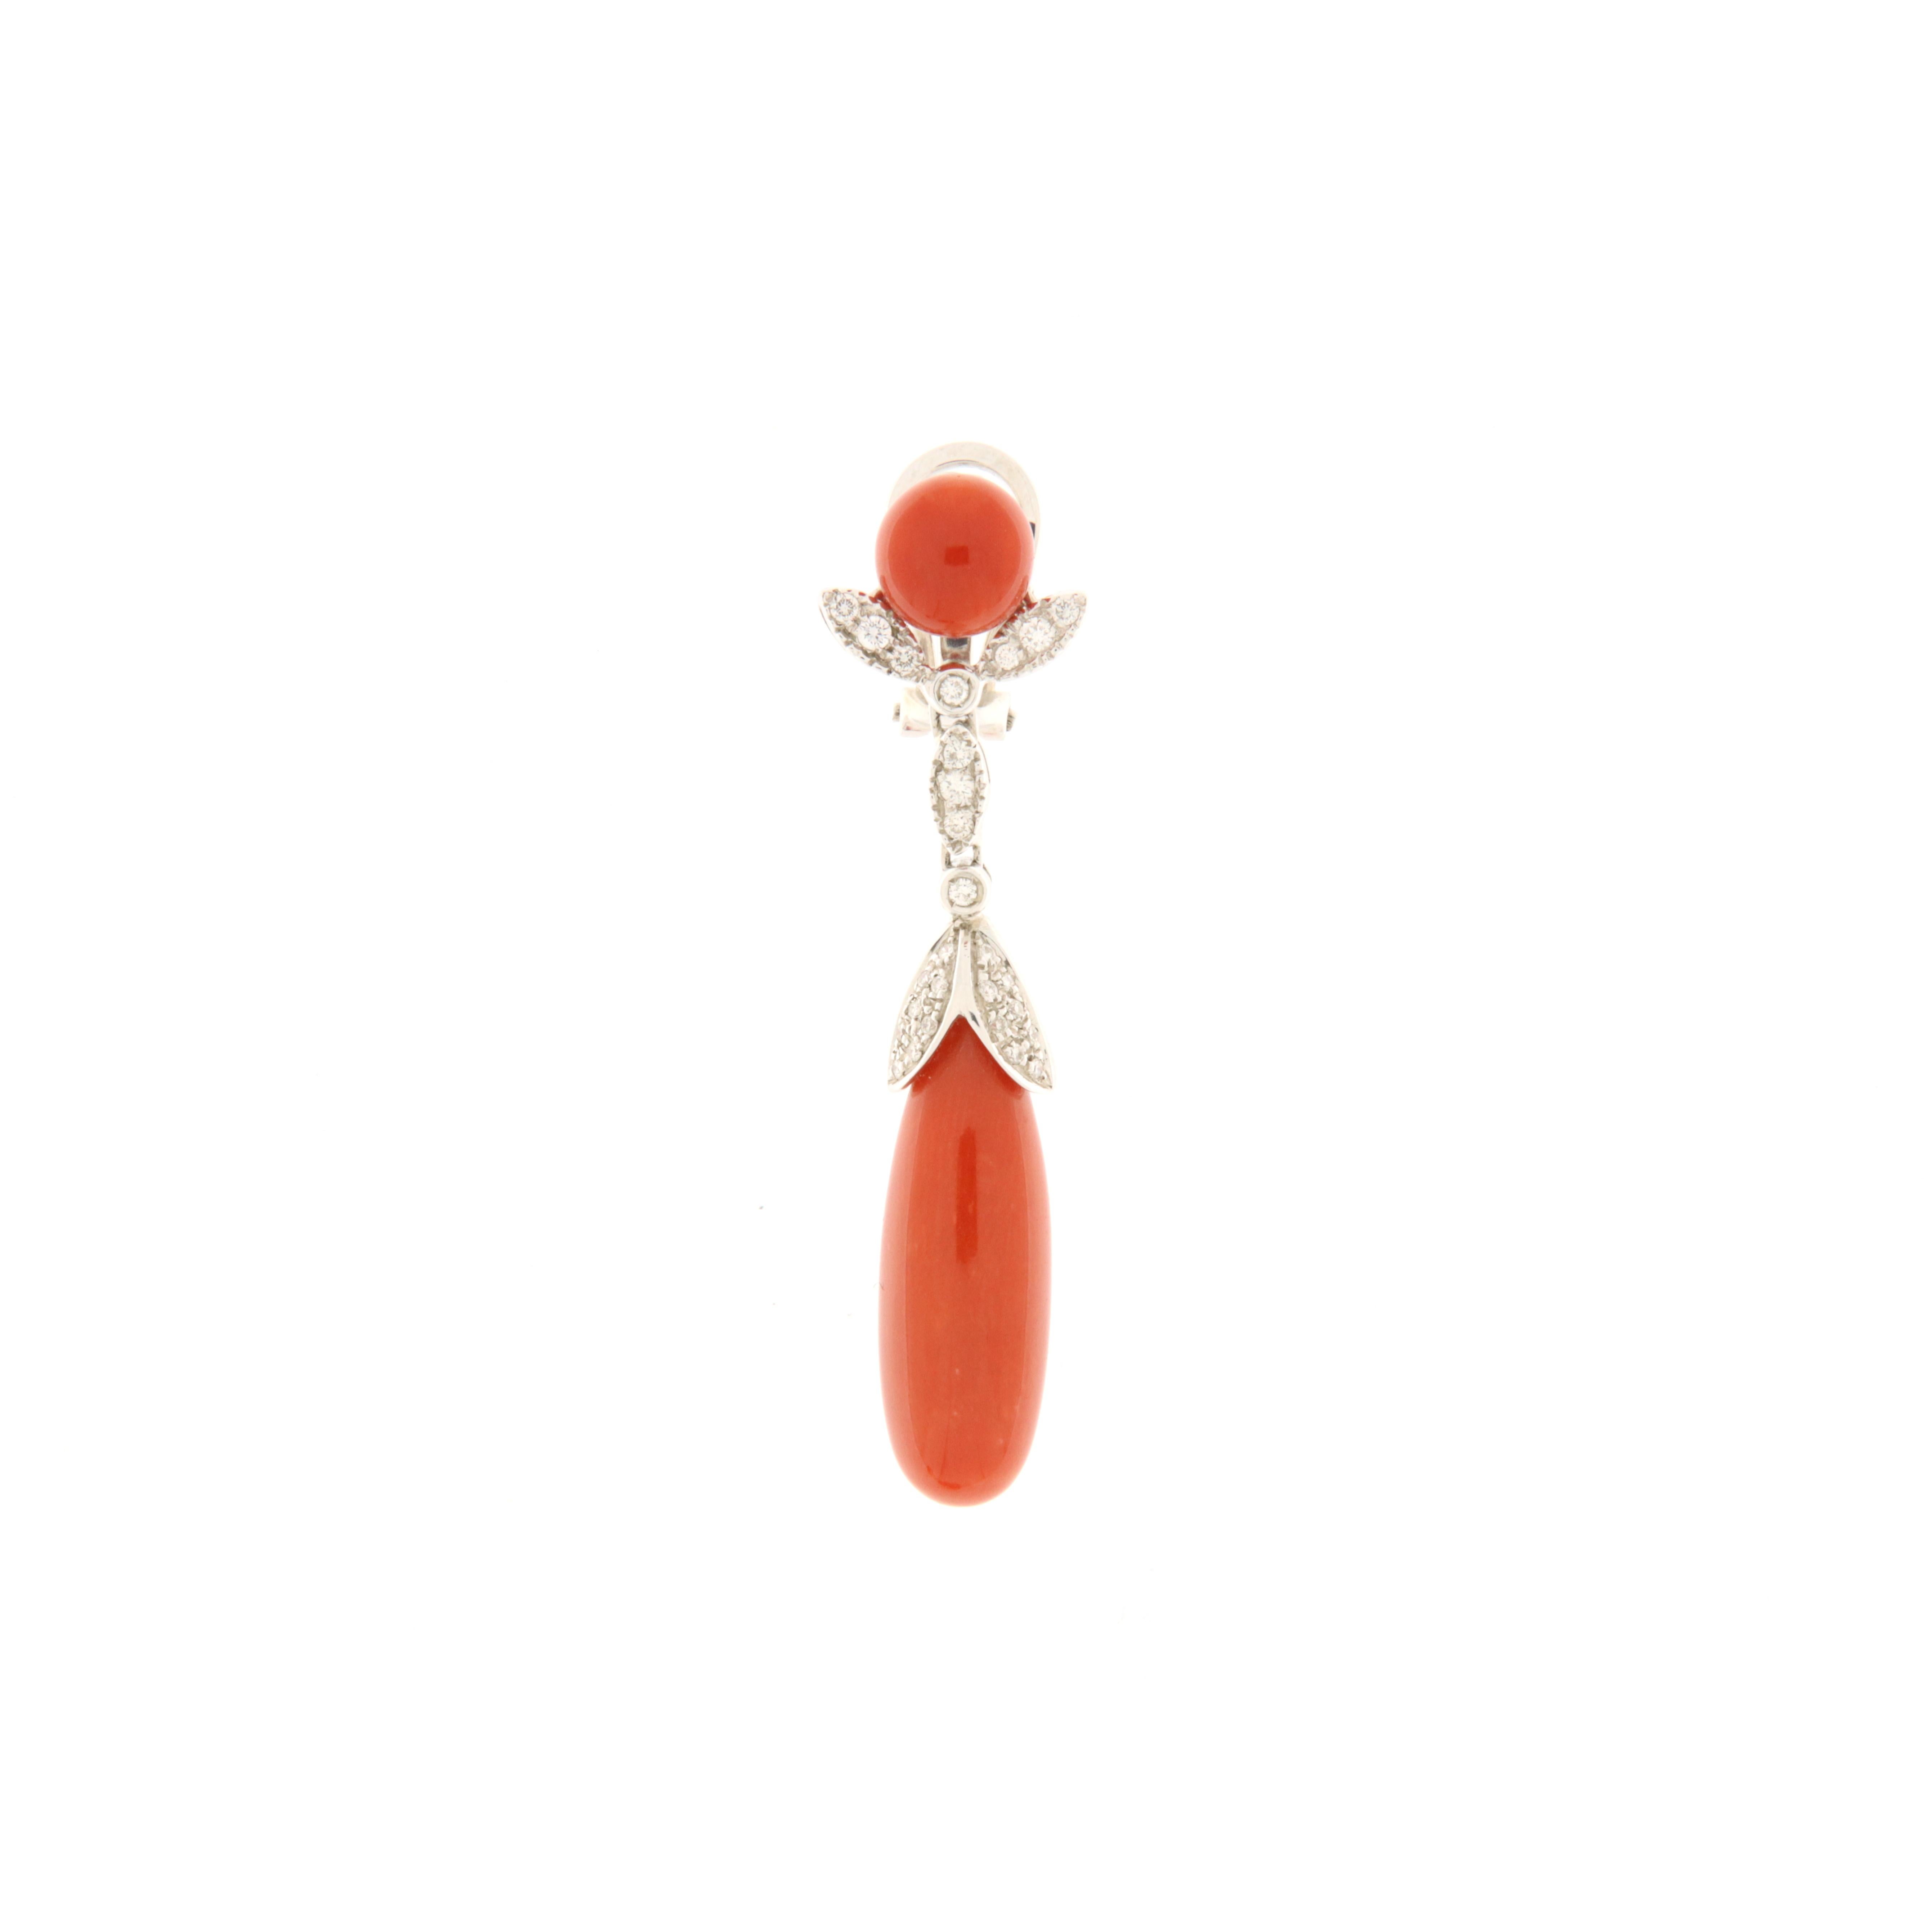 Dangling earrings made of 18 kt white gold. A round coral cabochon lobe from which white gold and brilliant (ct.0.58) decorative elements descend, ending in a beautiful red coral drop. The corals are from the Mediterranean Sea. This is a piece of